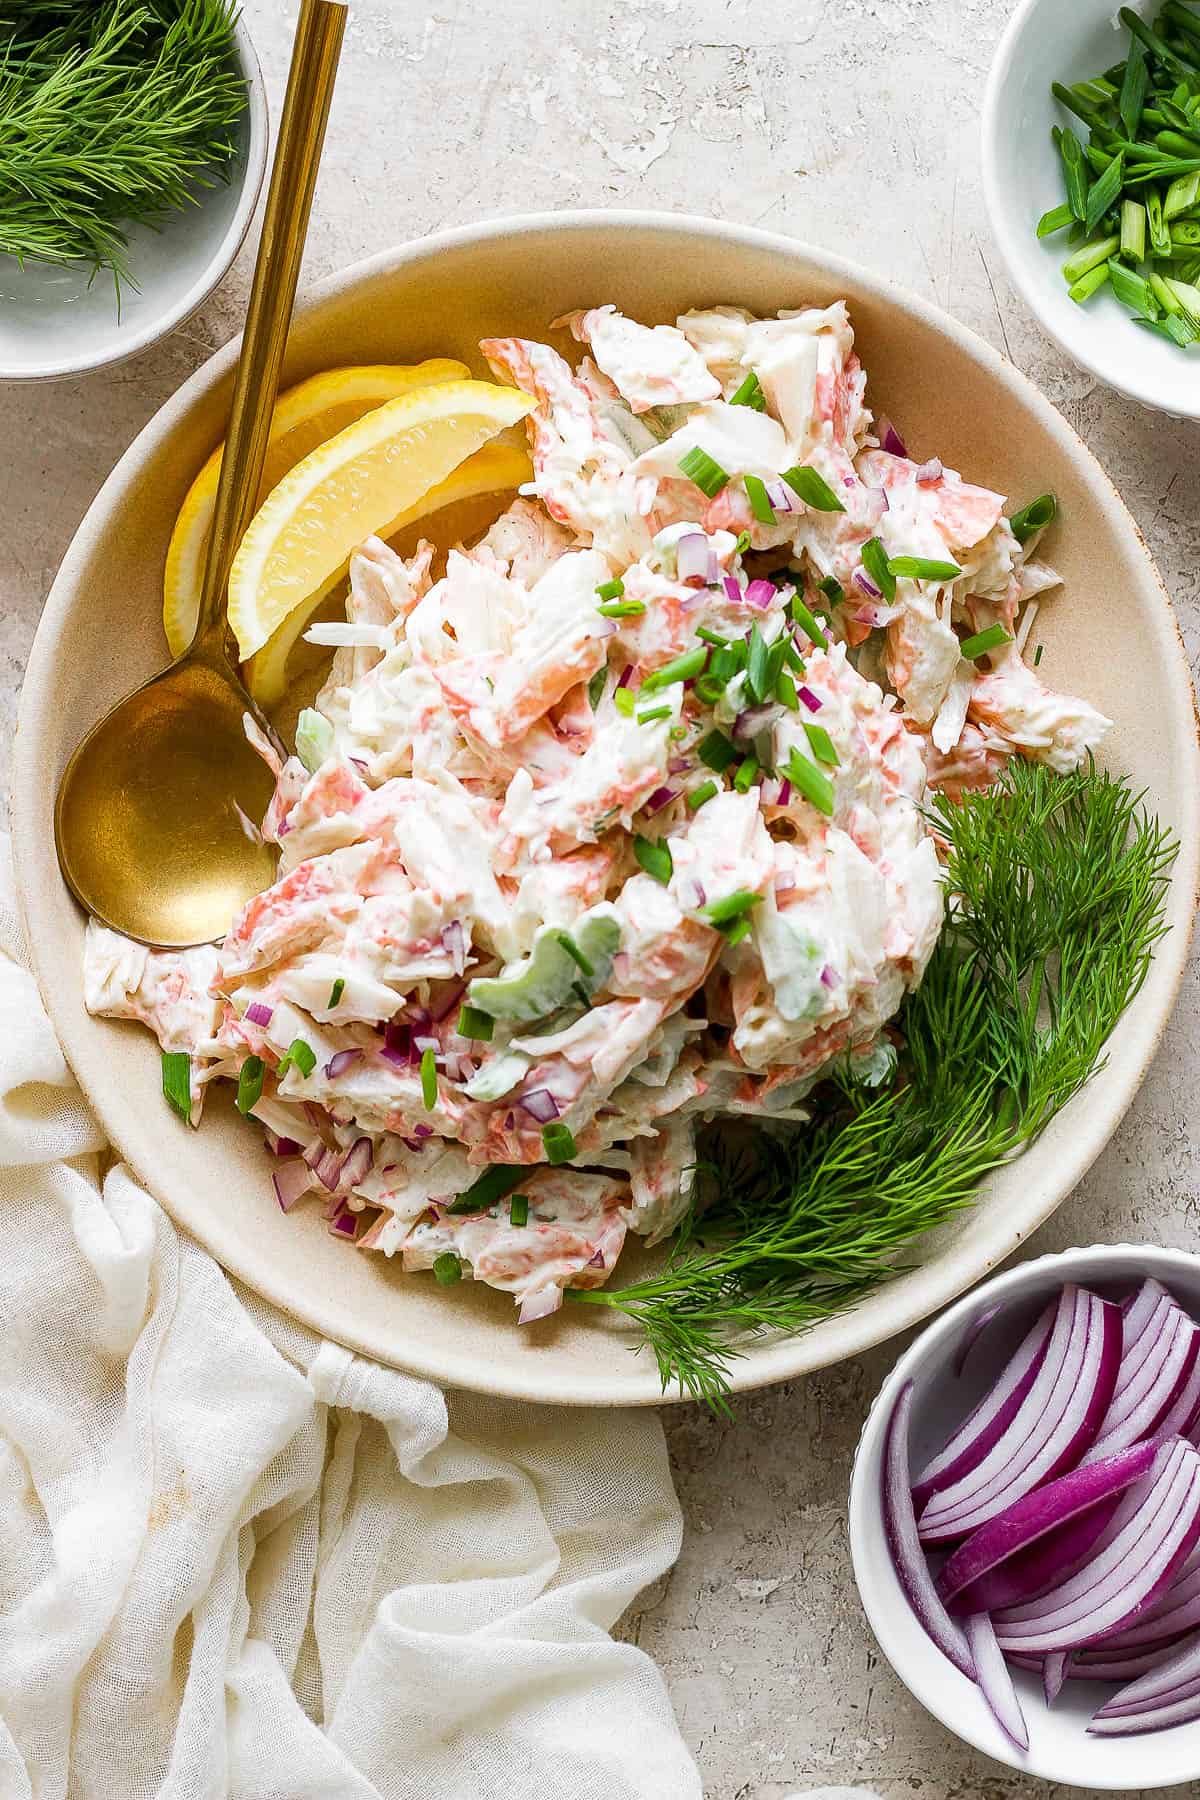 Crab salad in a shallow bowl with lemon wedges and fresh dill.